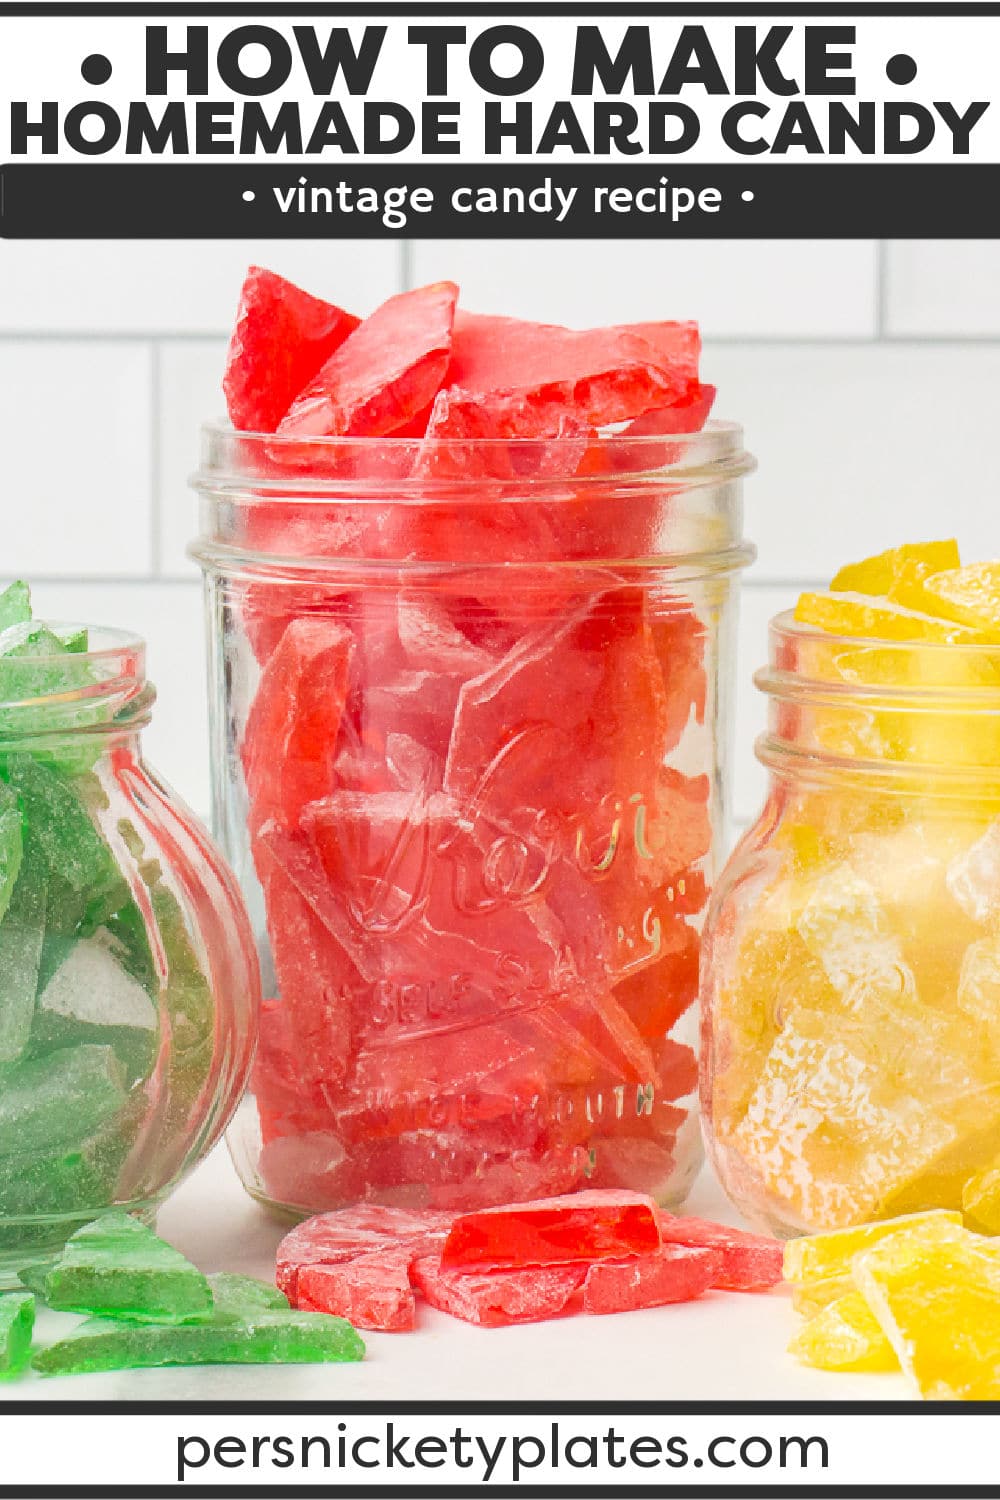 Homemade Old Fashioned Hard Candy - I Heart Naptime